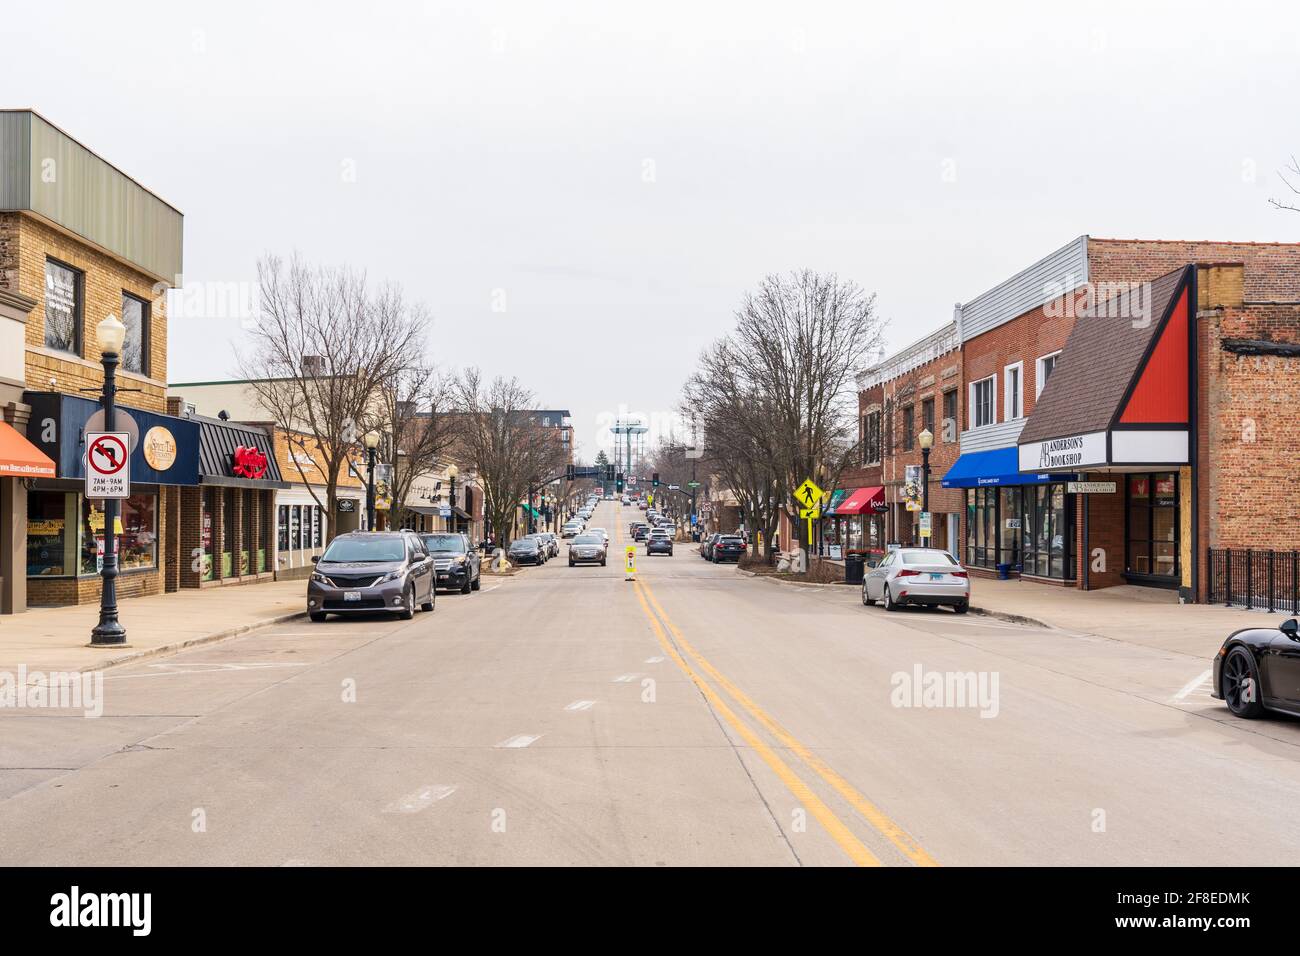 Chicago, Illinois - March 12, 2021: Downers Grove Village Street During the COVID-19 Pandemic. Stock Photo